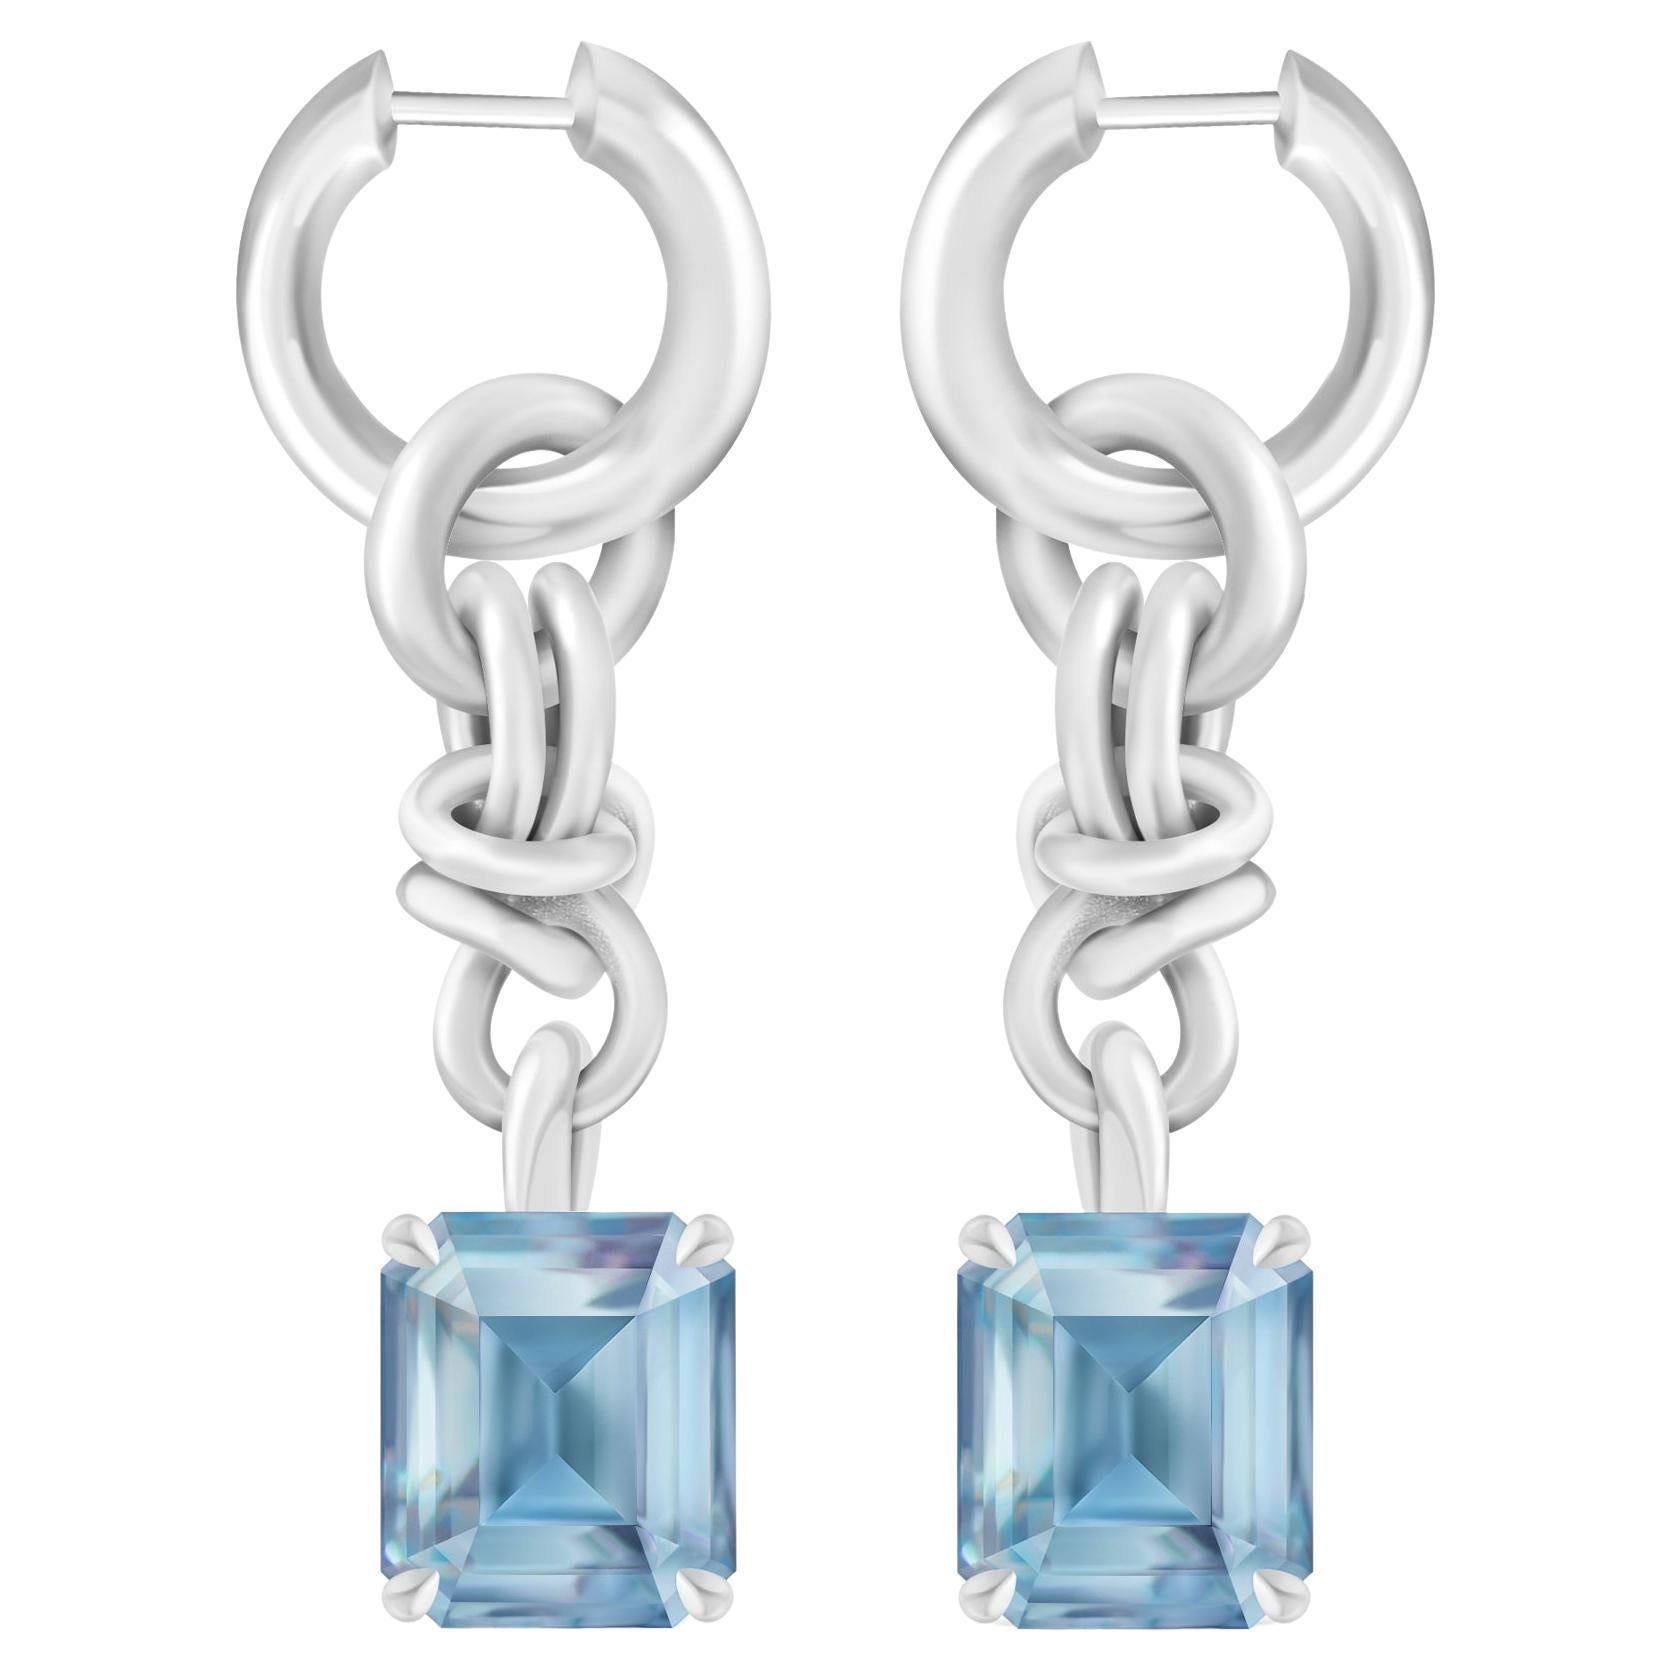 8, 5 Carat Aquamarines 18 Karat White Gold Earrings "Weekend" Collection by D&A